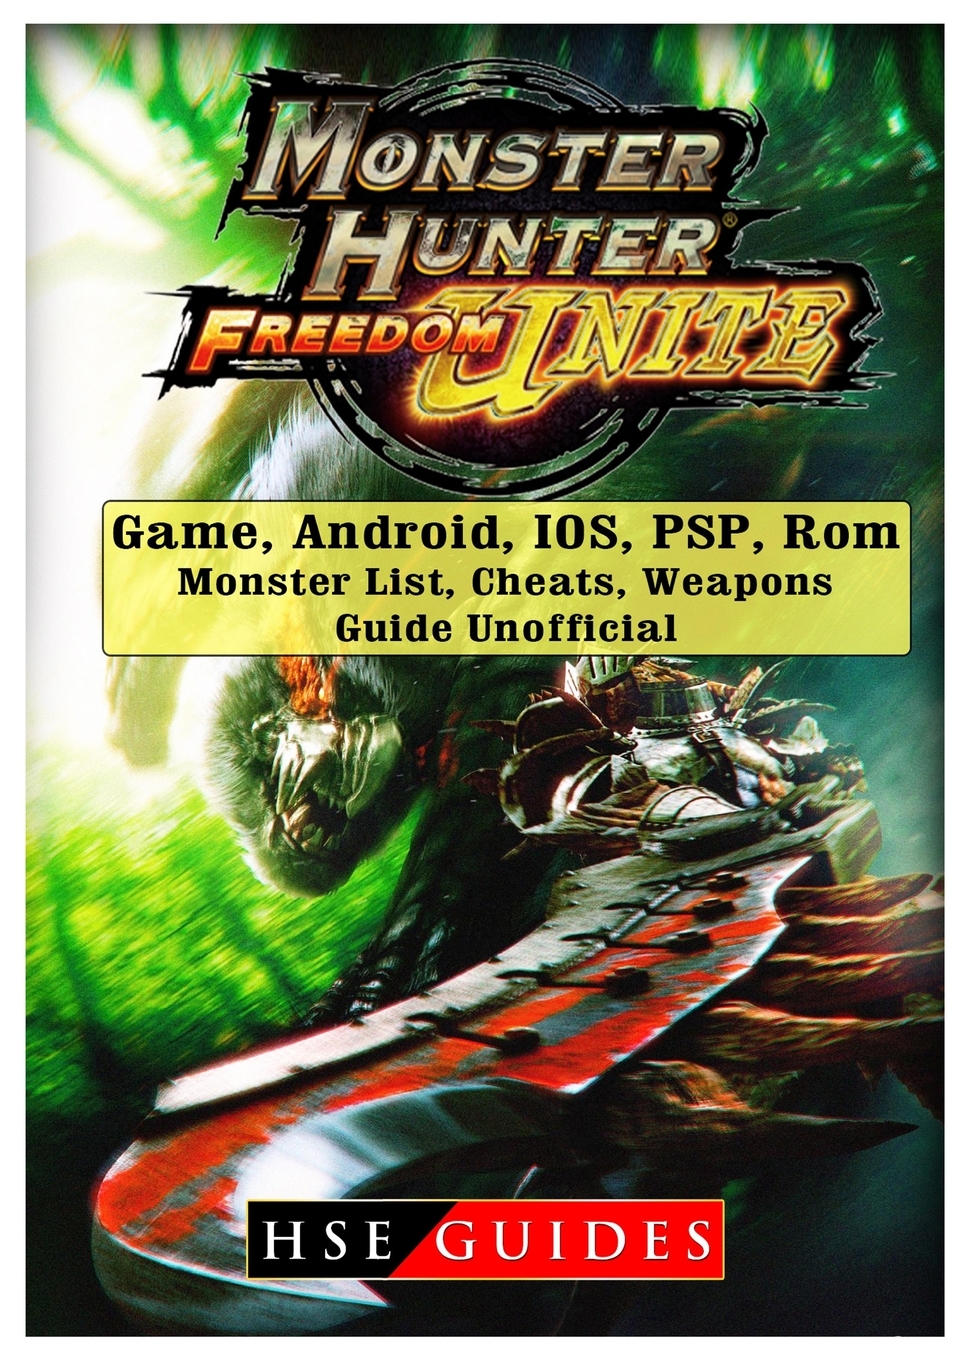 Monster hunter freedom 2 cheats ppsspp download